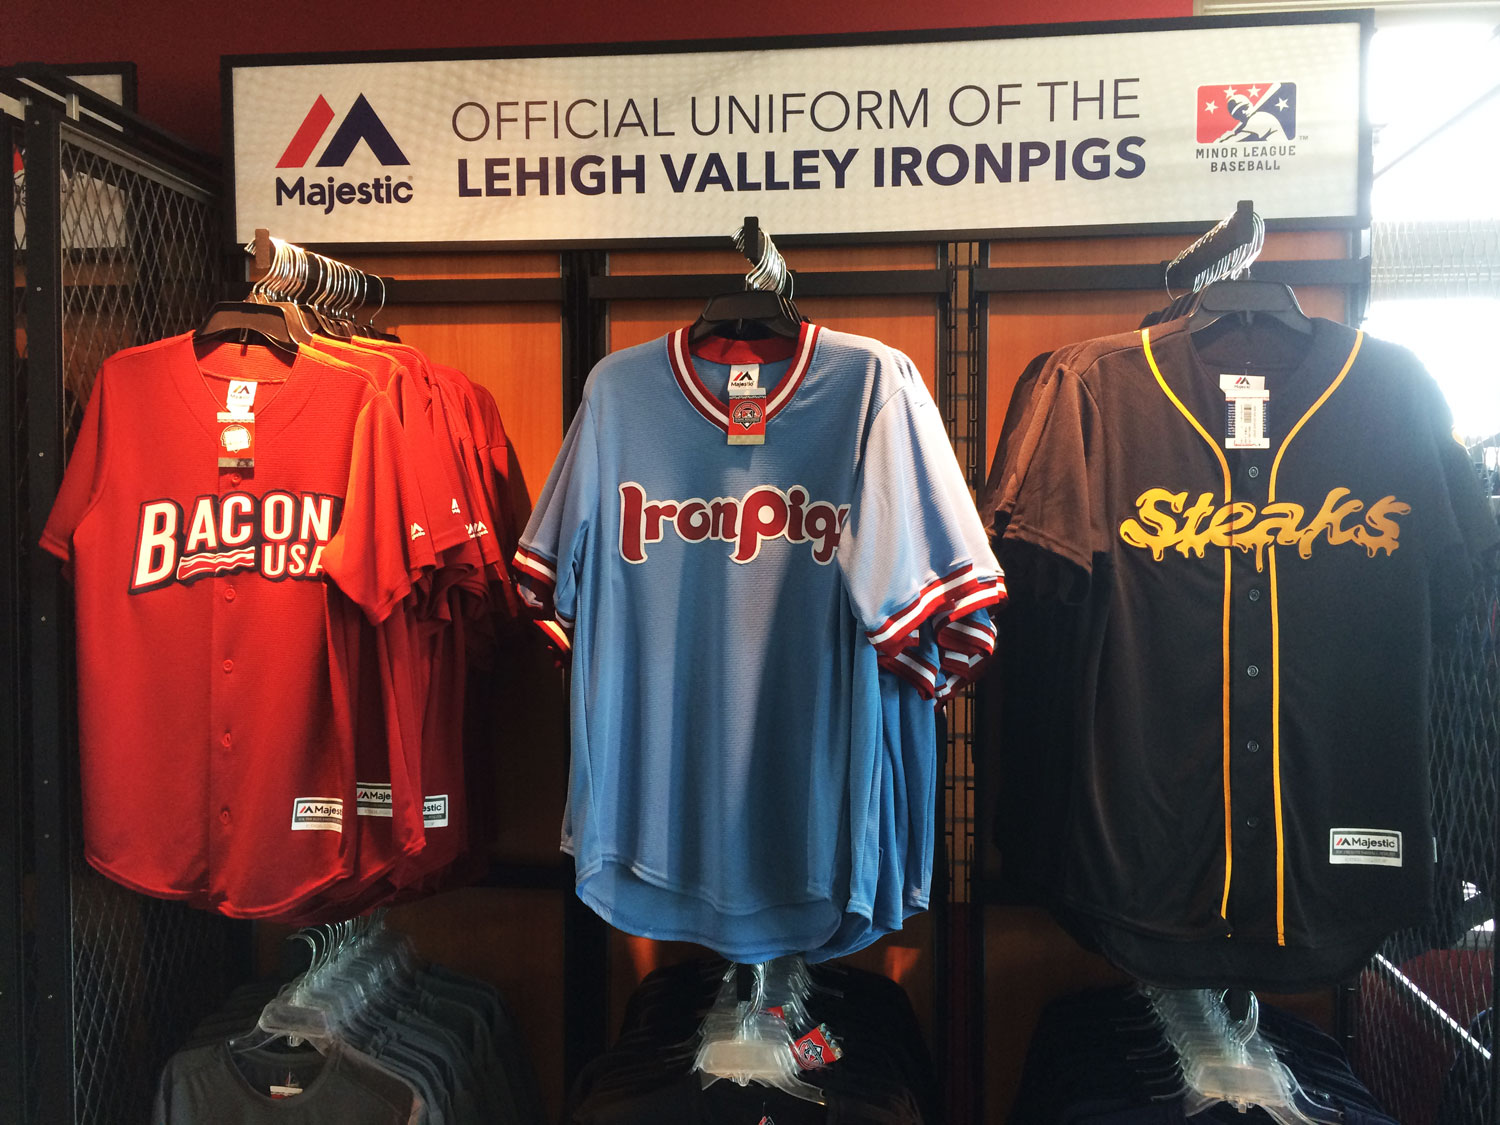 Lehigh Valley shows off their Bacon USA and Cheesesteaks theme jerseys. (WTOP/Noah Frank)